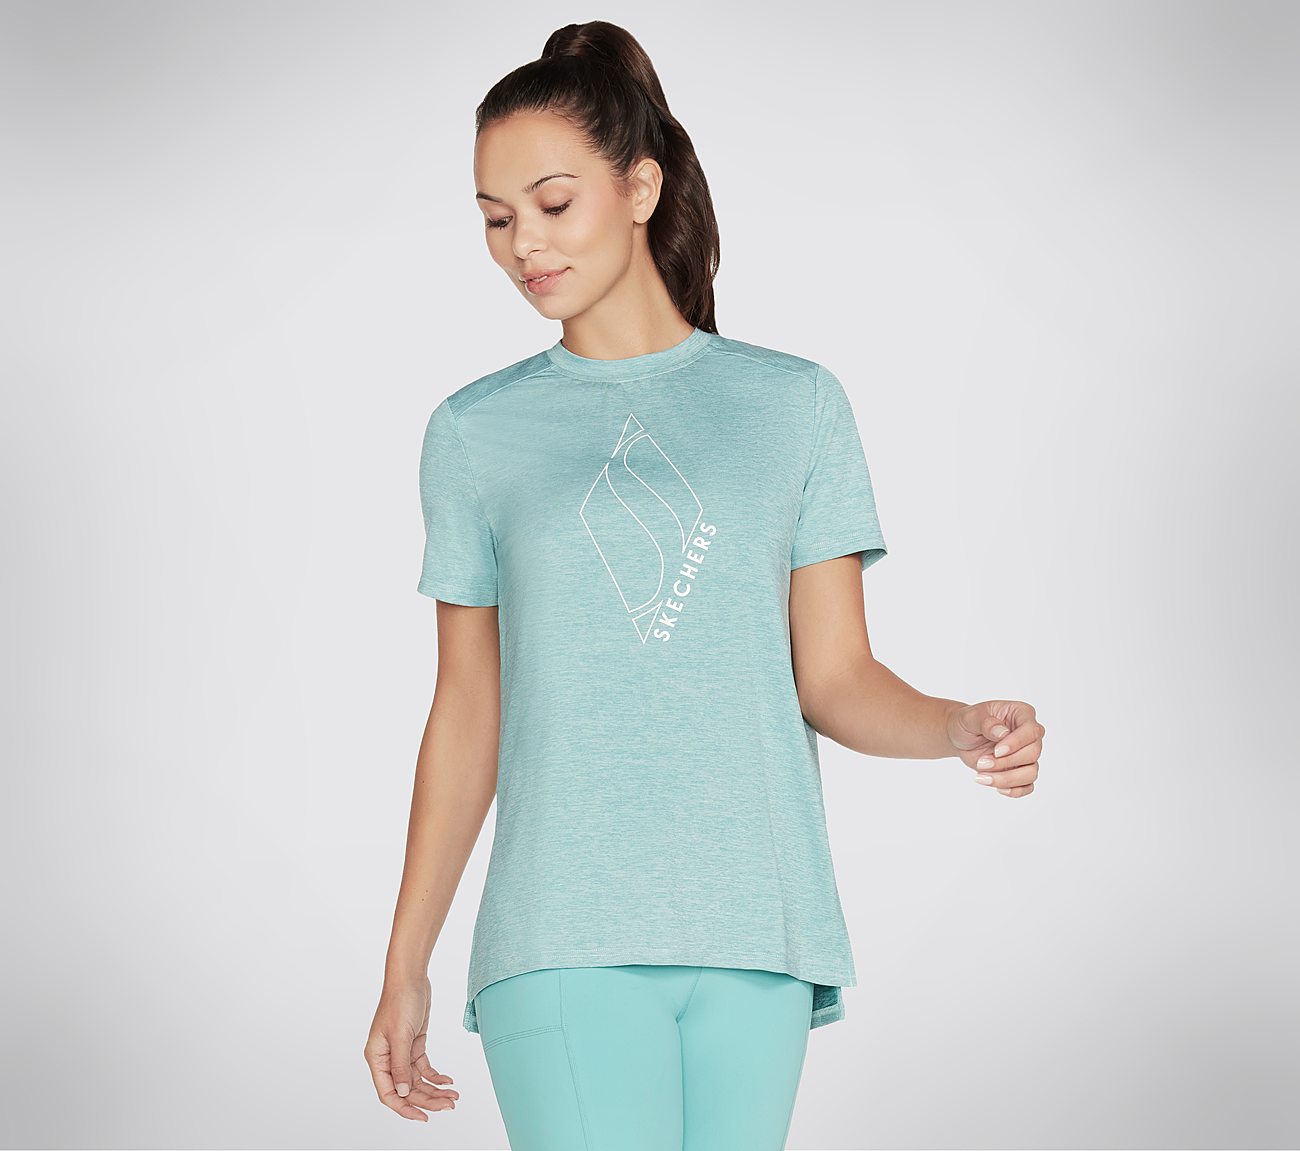 DIAMOND BLISSFUL TEE, TURQUOISE Apparel Lateral View